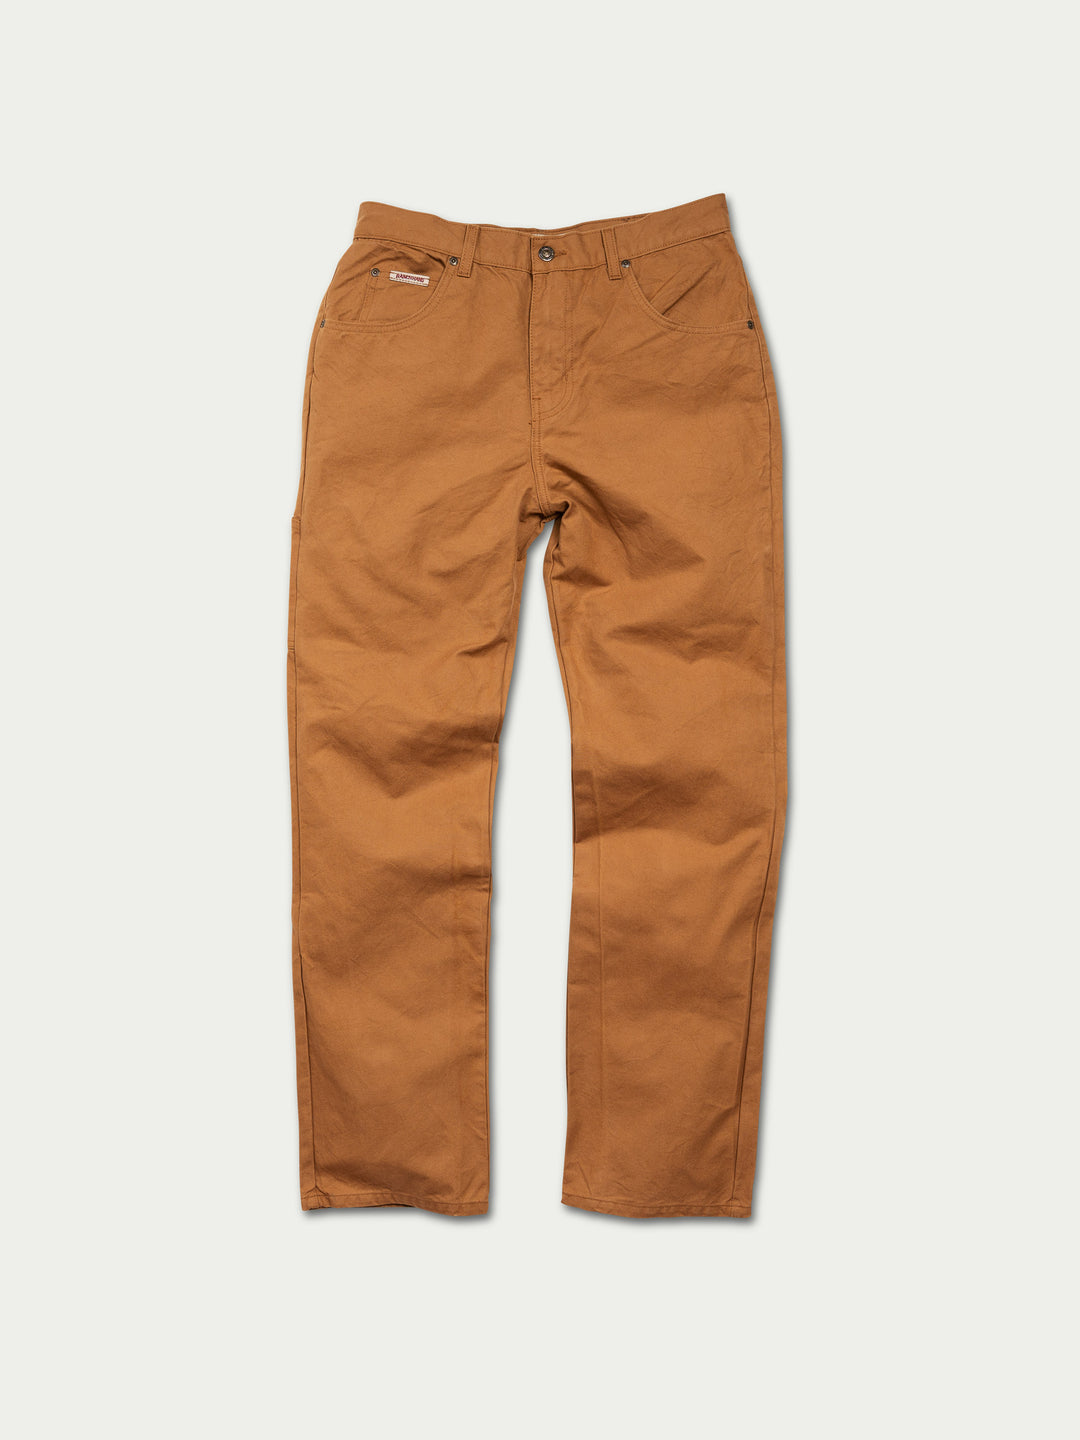 FencelineÂ® Canvas RanchHand Jeans in Saddle - Schaefer Outfitter